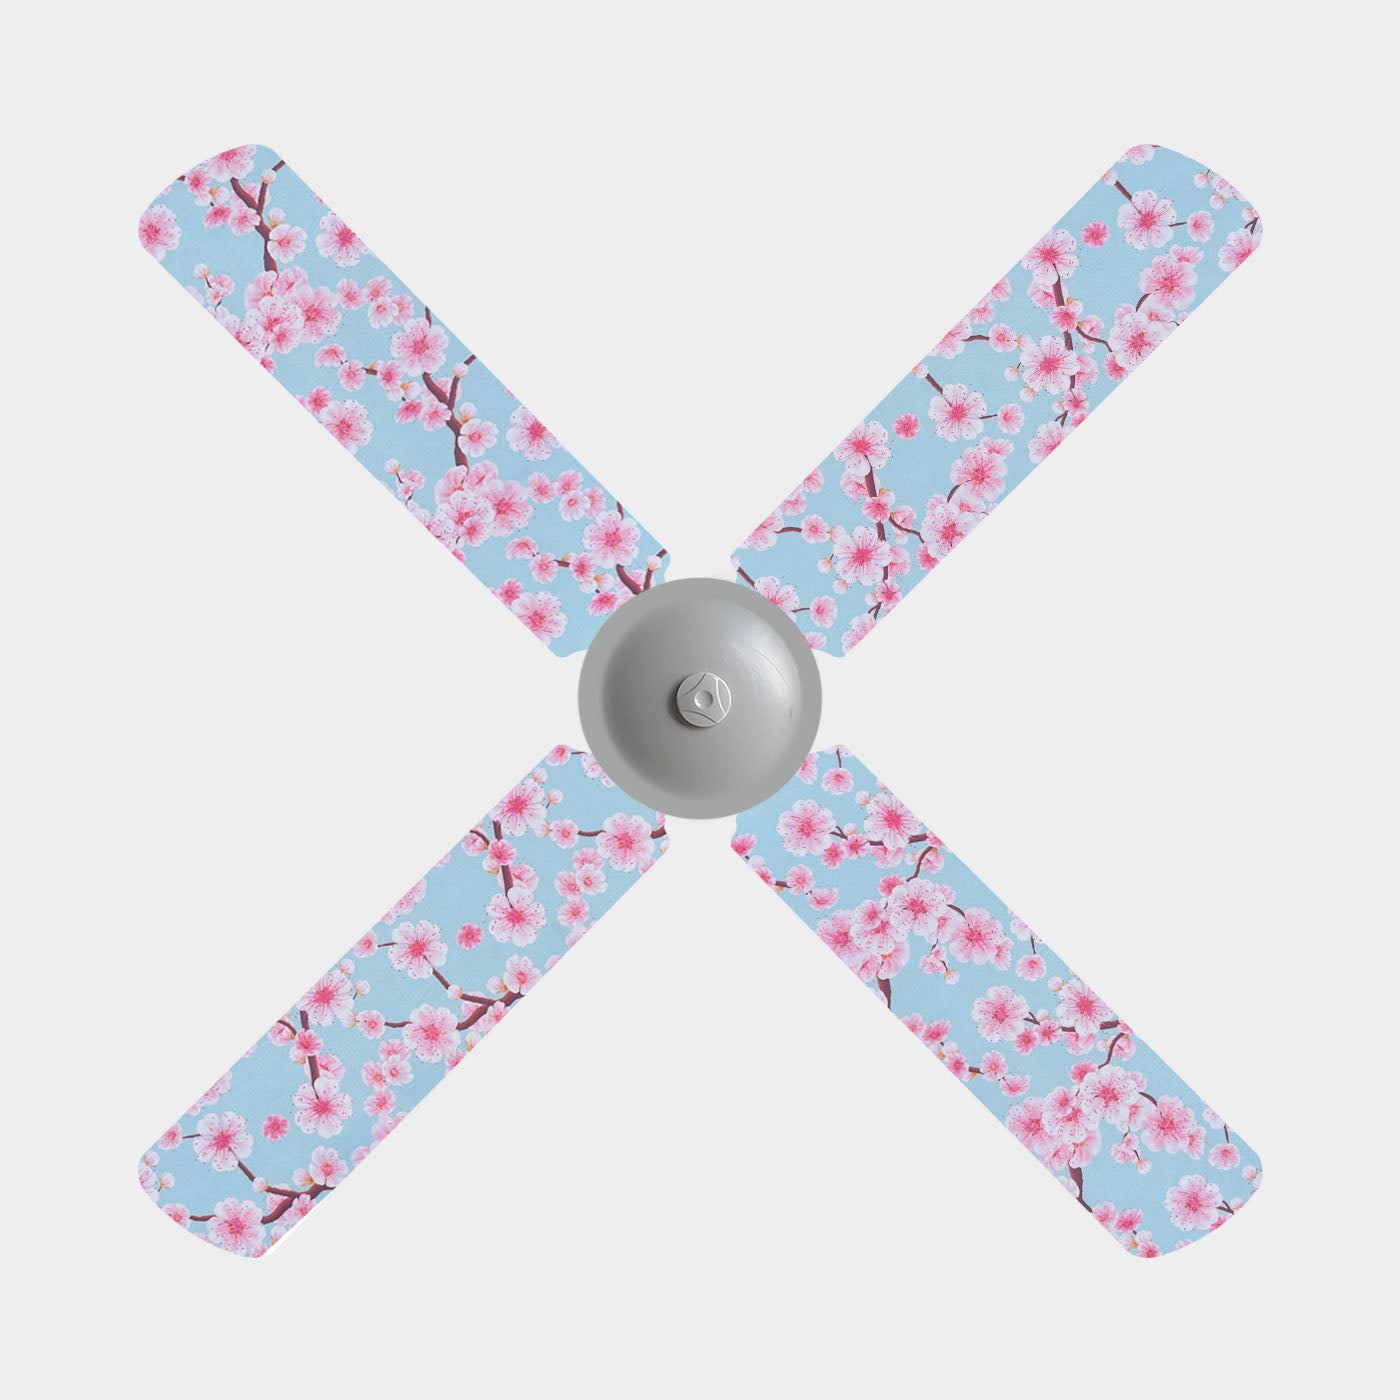 Cherry blossom fan blade covers on a blue background shown on a 4 blade ceiling fan